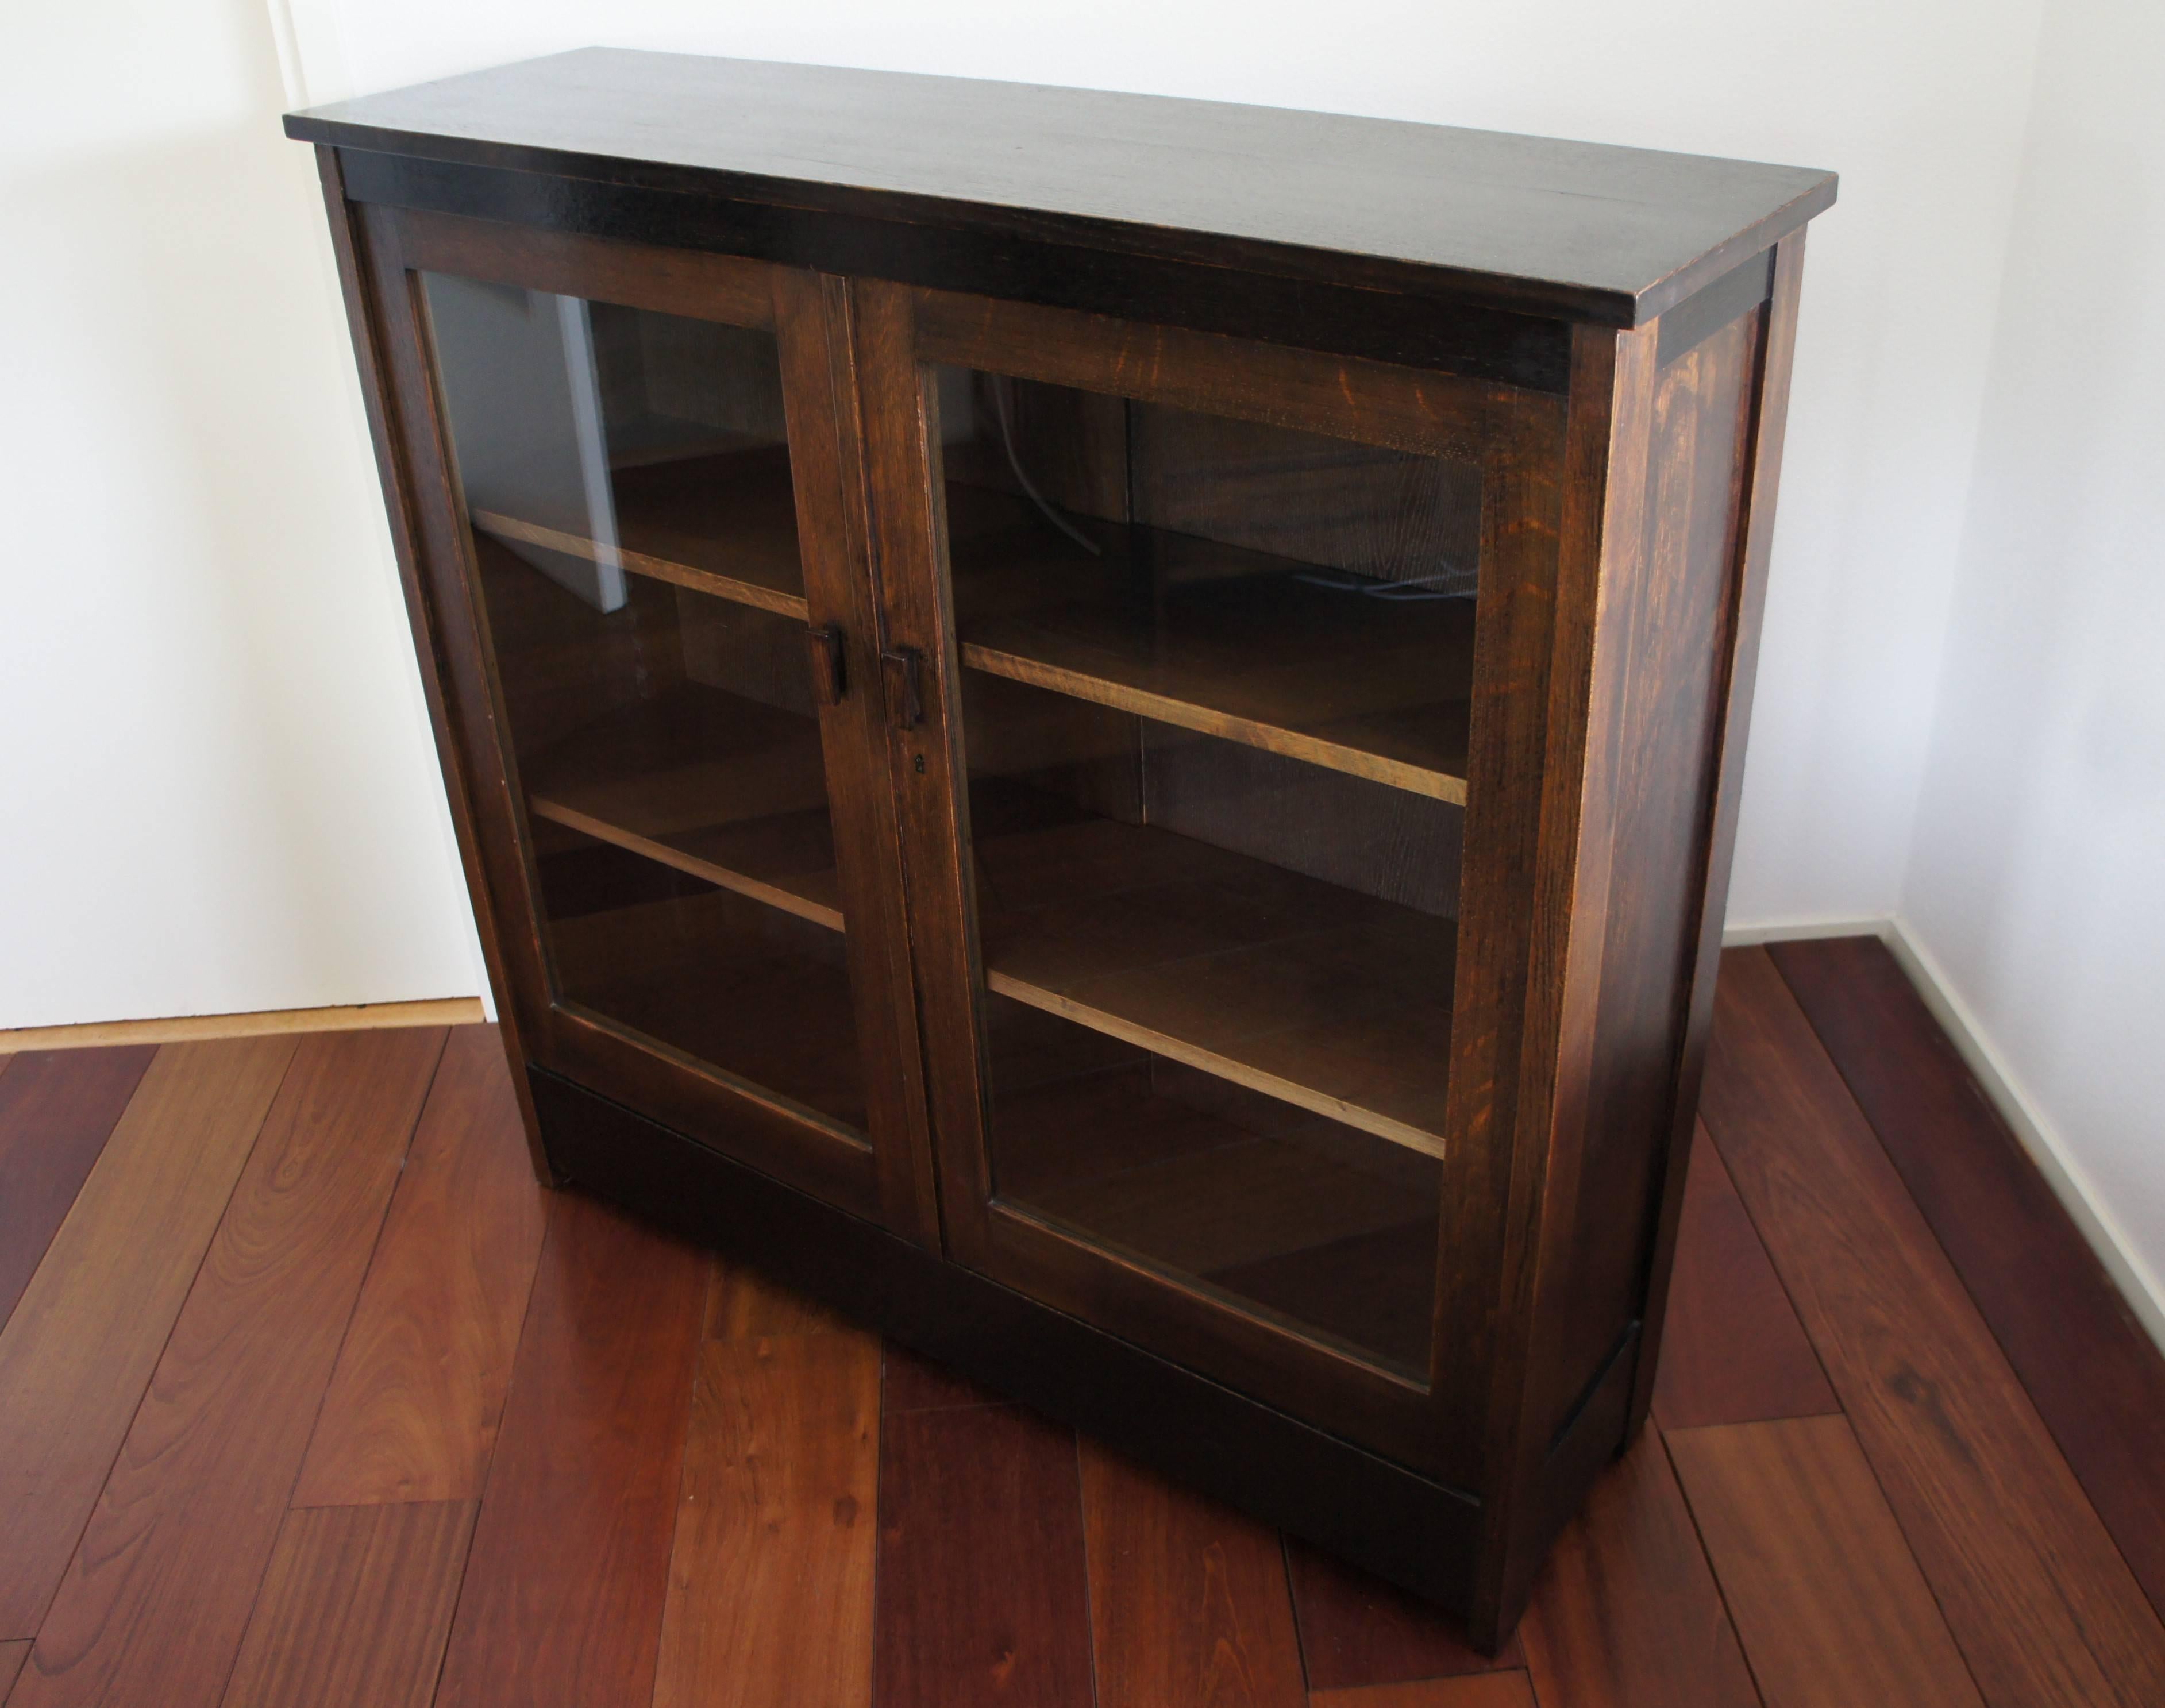 Art Deco Haagse School / The Hague School Desk and Bookcase by LOV Oosterbeek For Sale 1